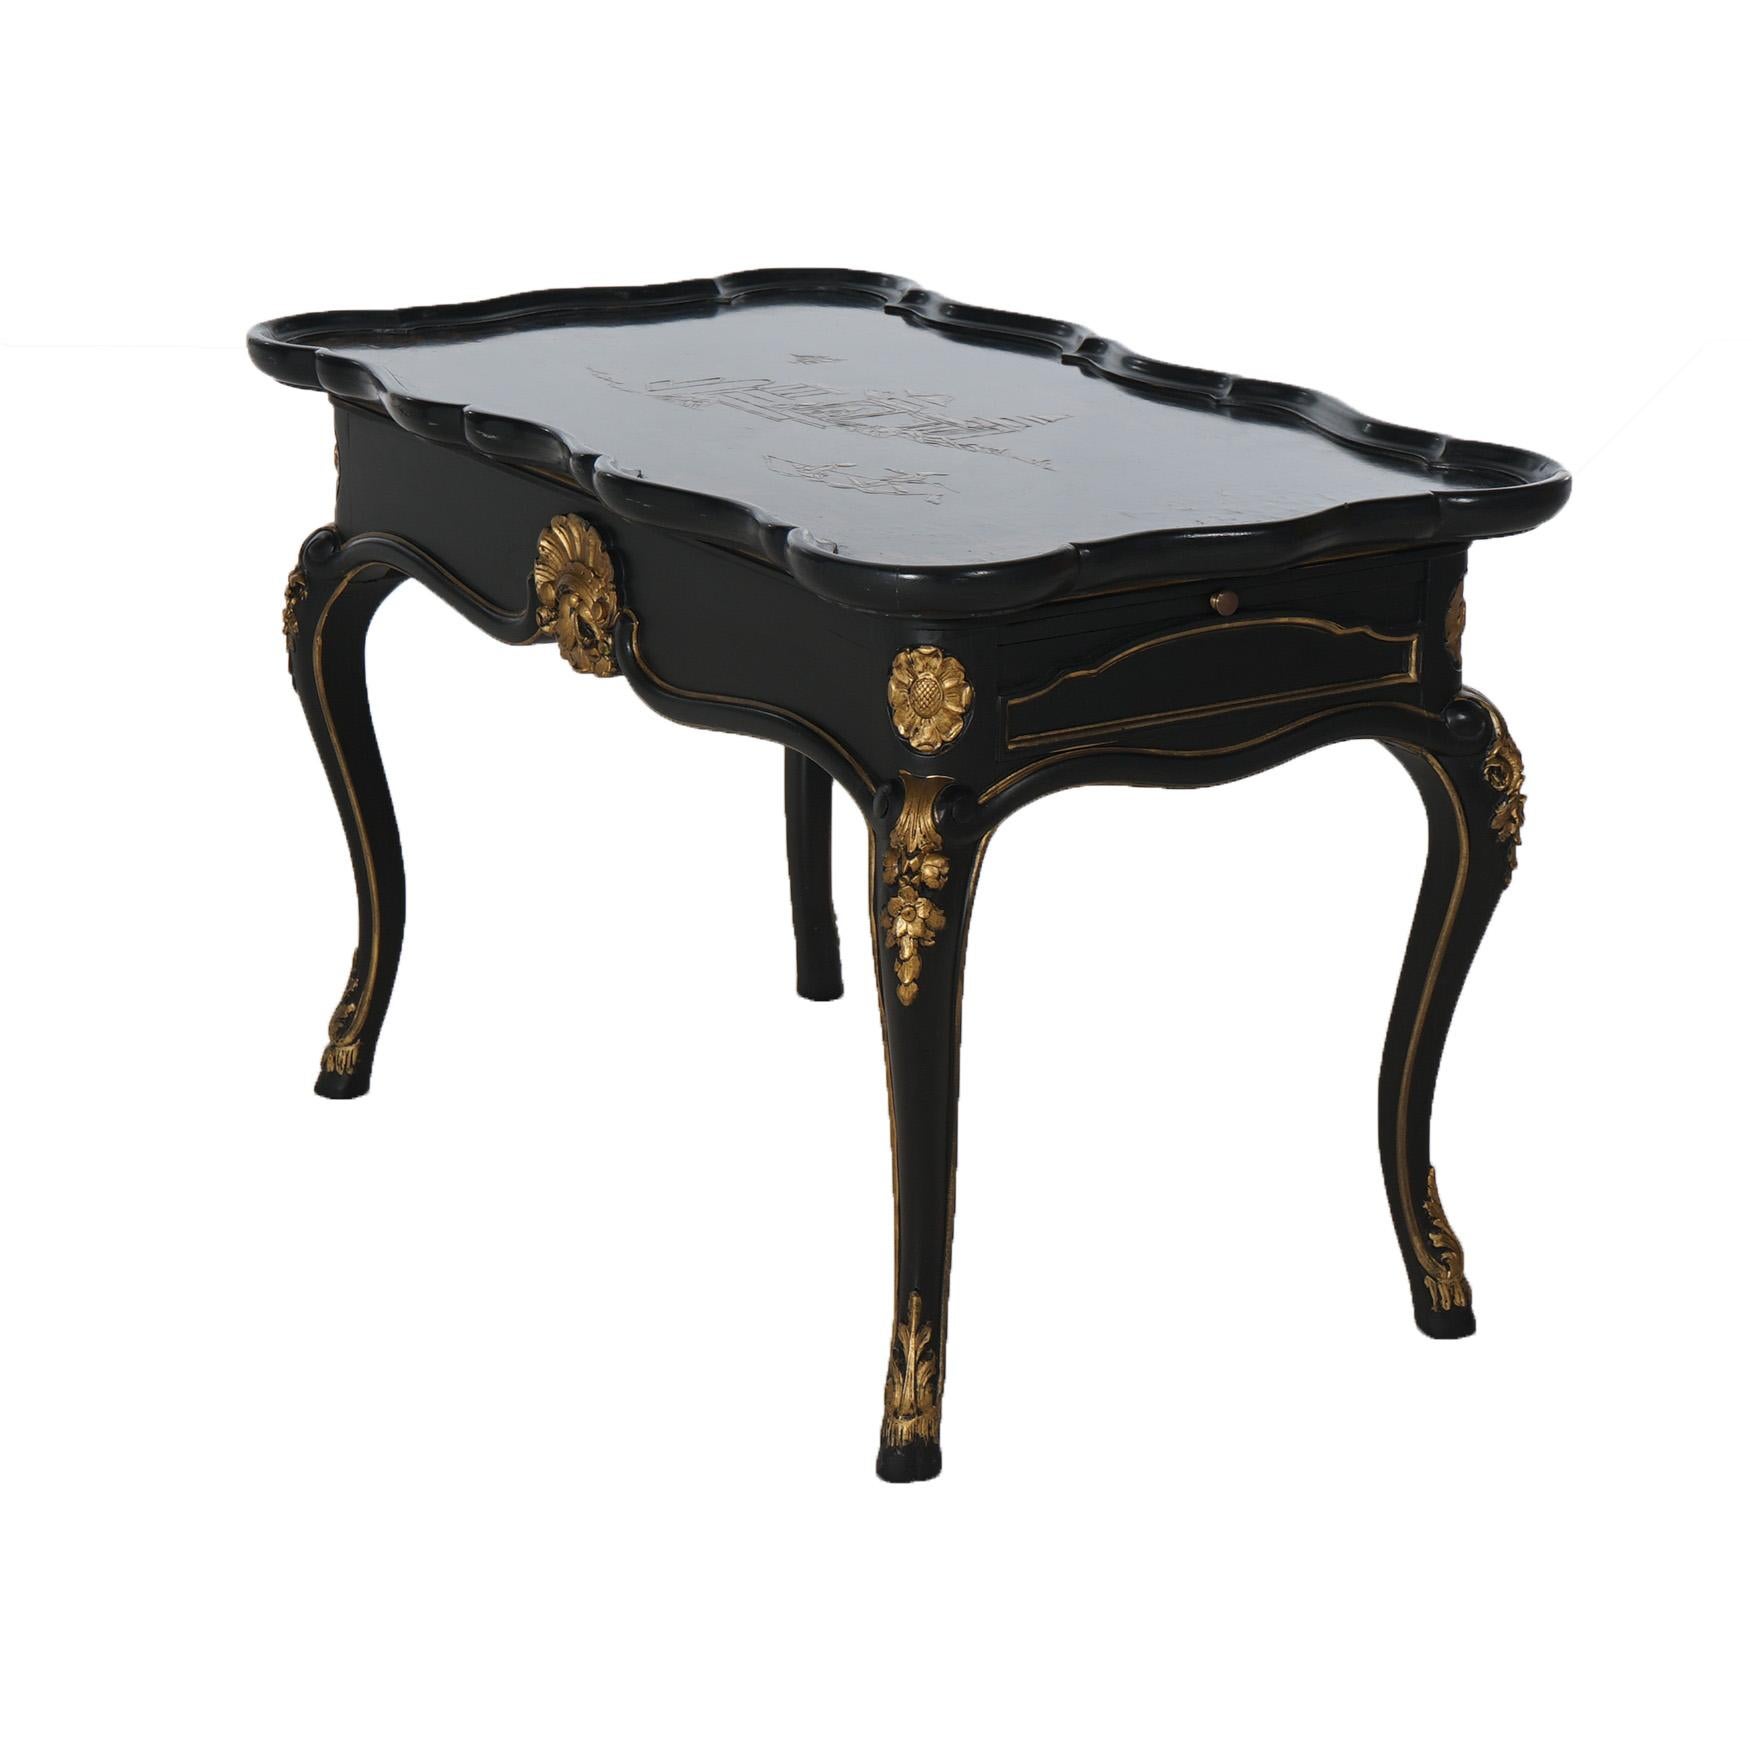  Antique French Style Chinoiserie Gilt Decorated Ebonized Low Tea Table C1930 3